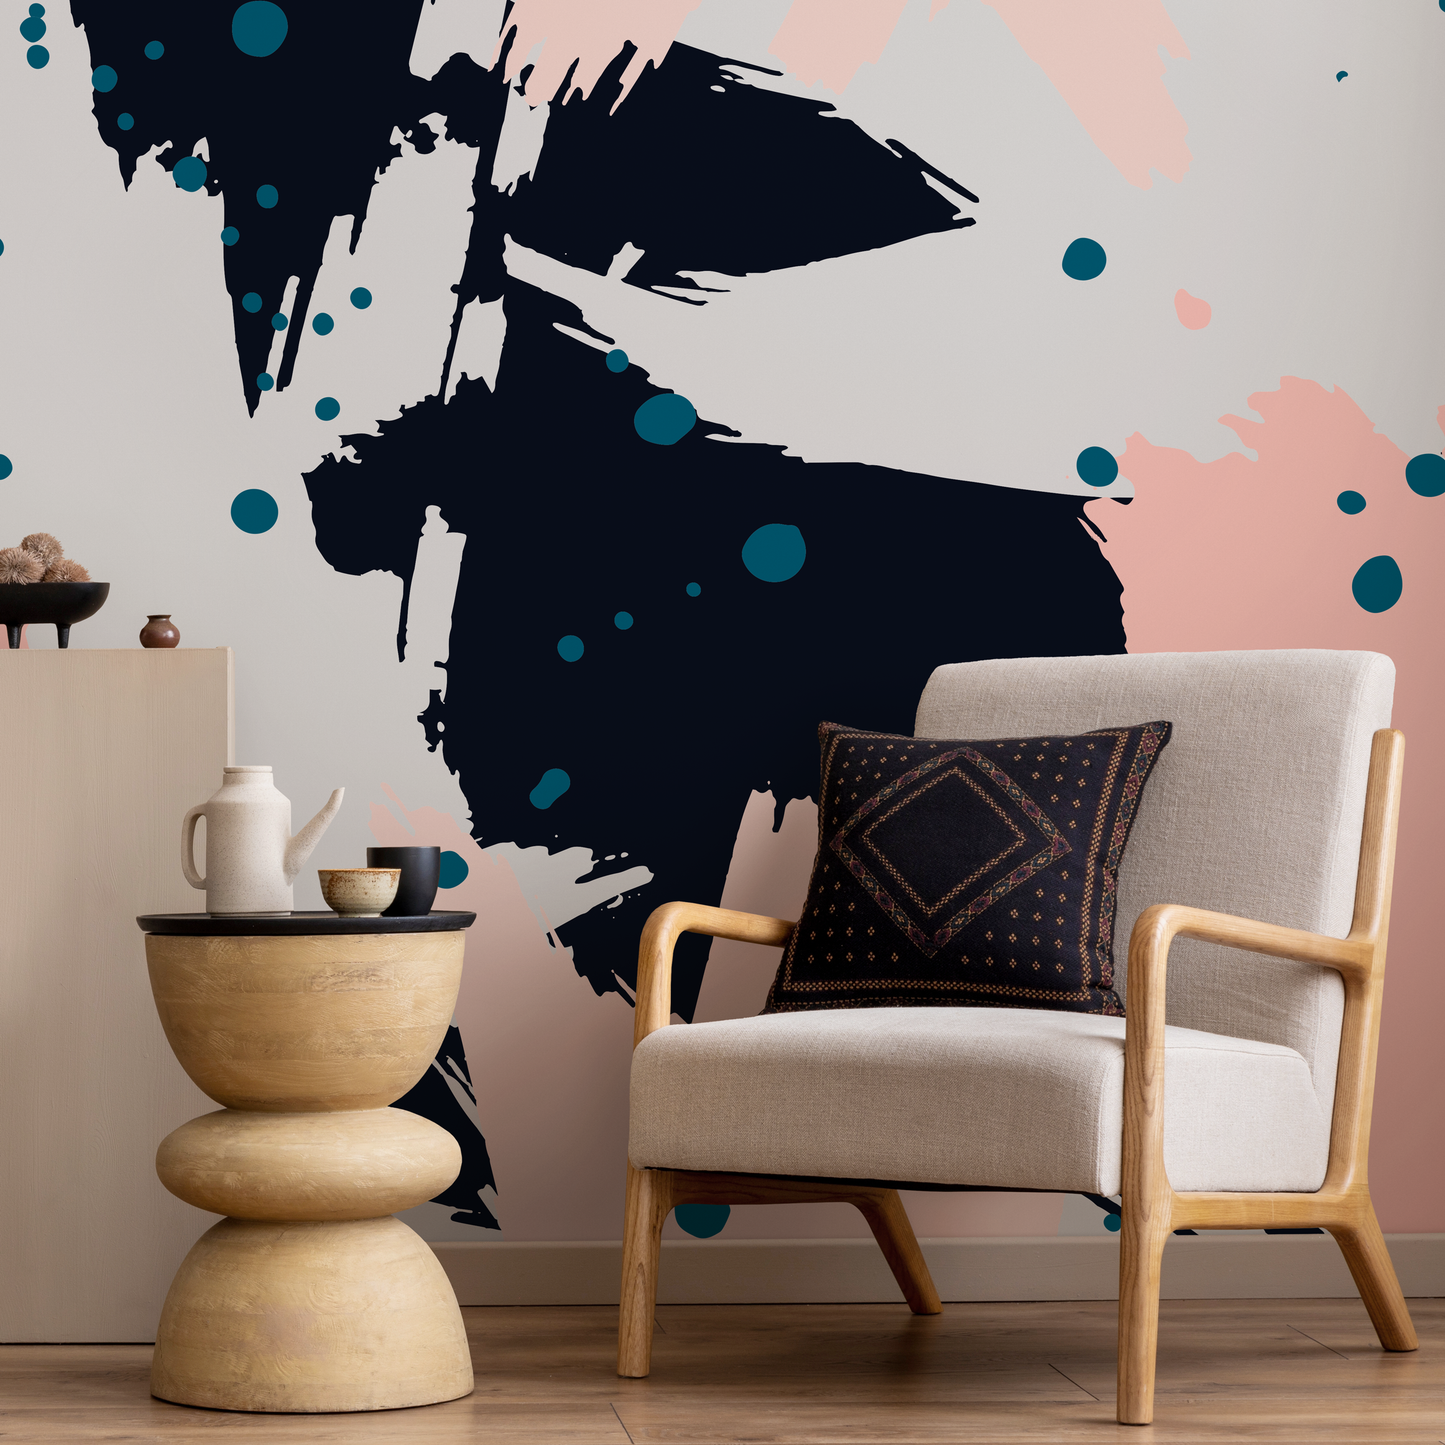 Wallpaper Peel and Stick Wallpaper Removable Wallpaper Home Decor Wall Art Wall Decor Room Decor / Abstract Brush Wallpaper - B263